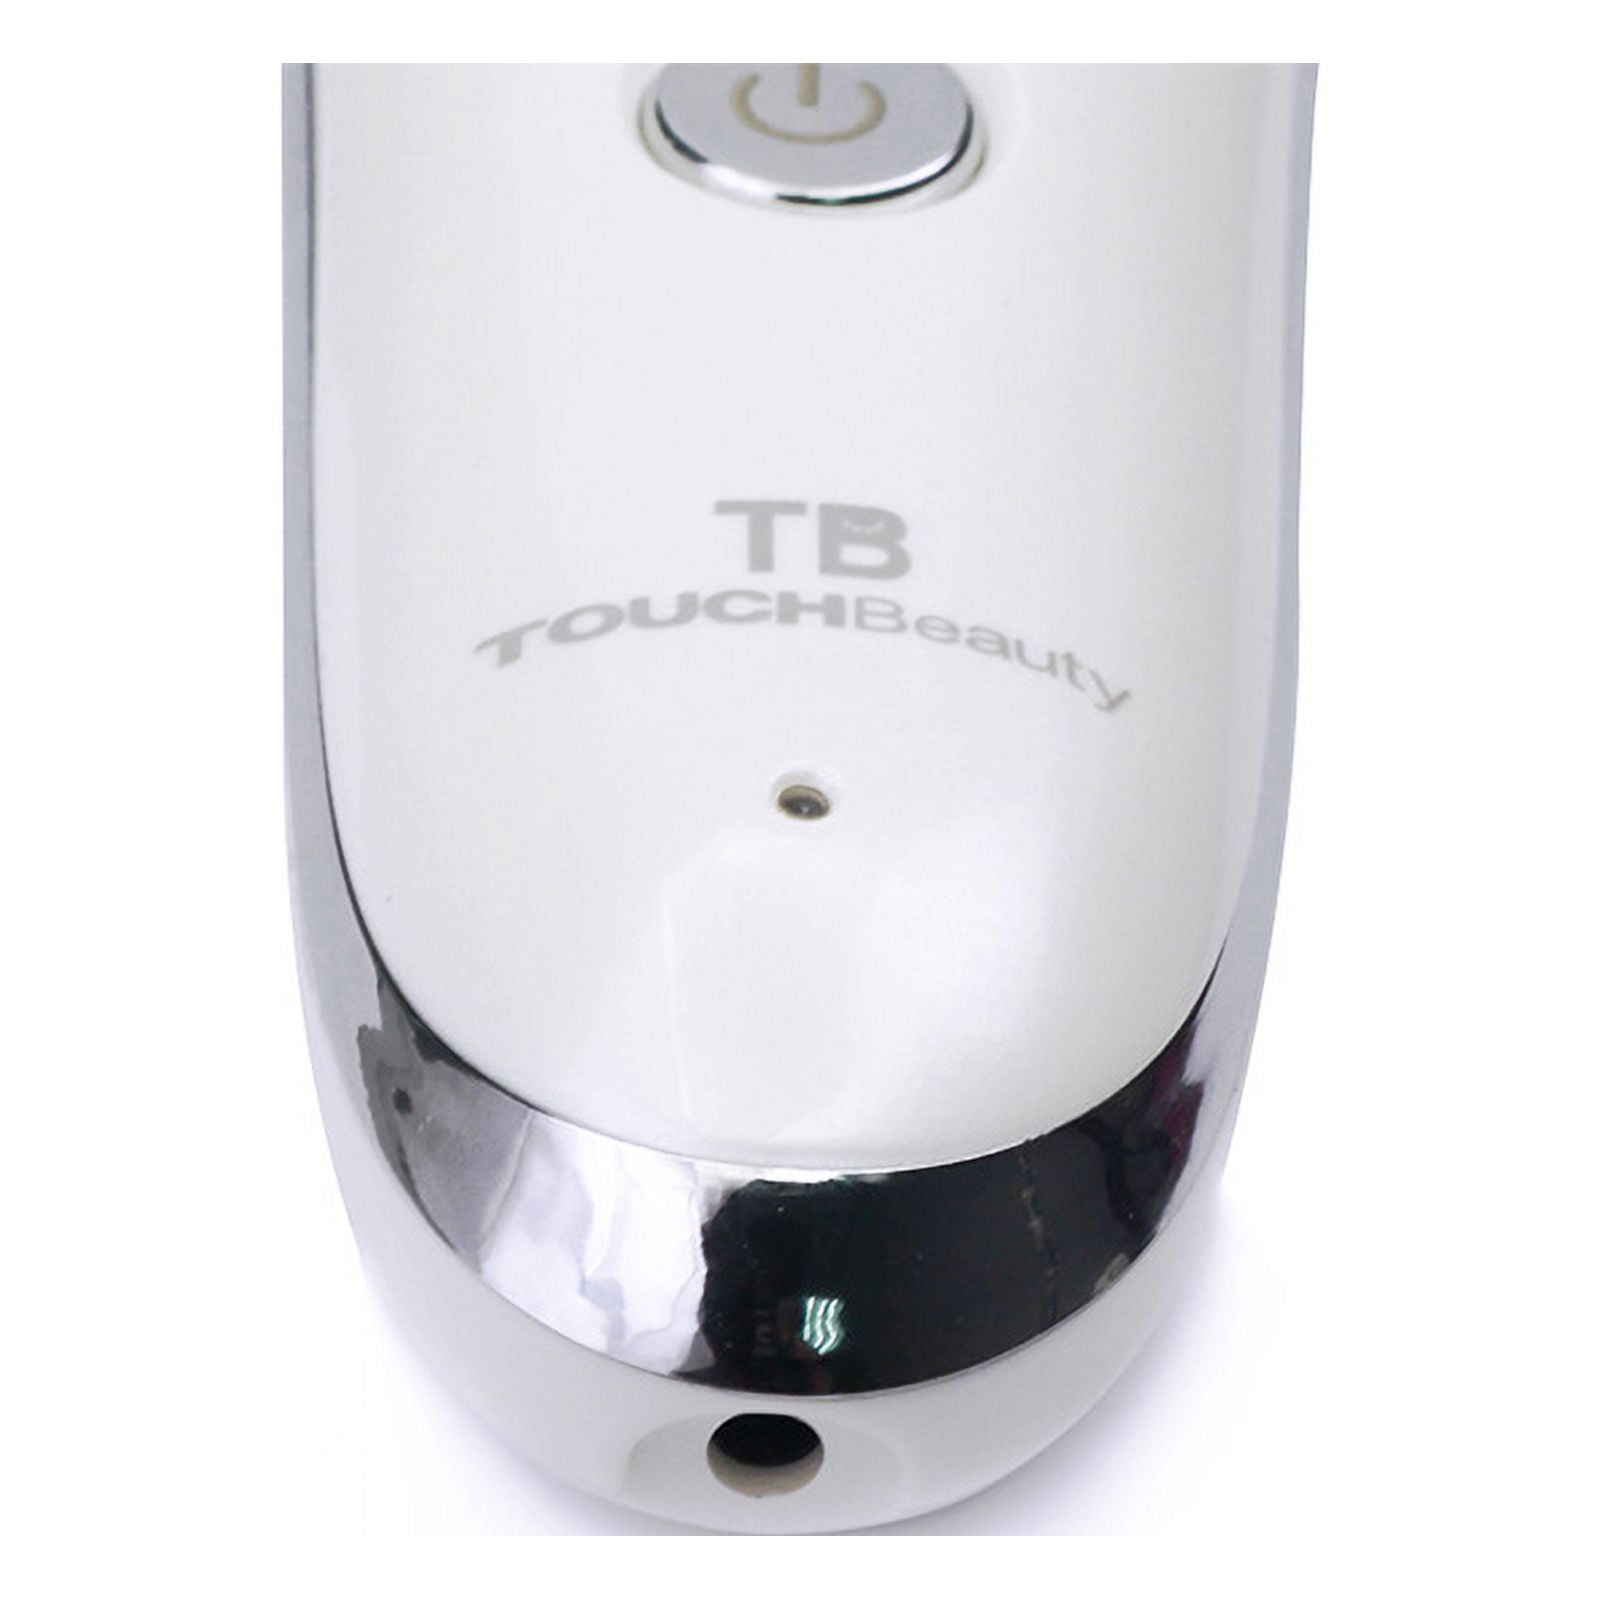 Elegant Home Fashions TB-1389 Touch Beauty Hot Cool & Massager